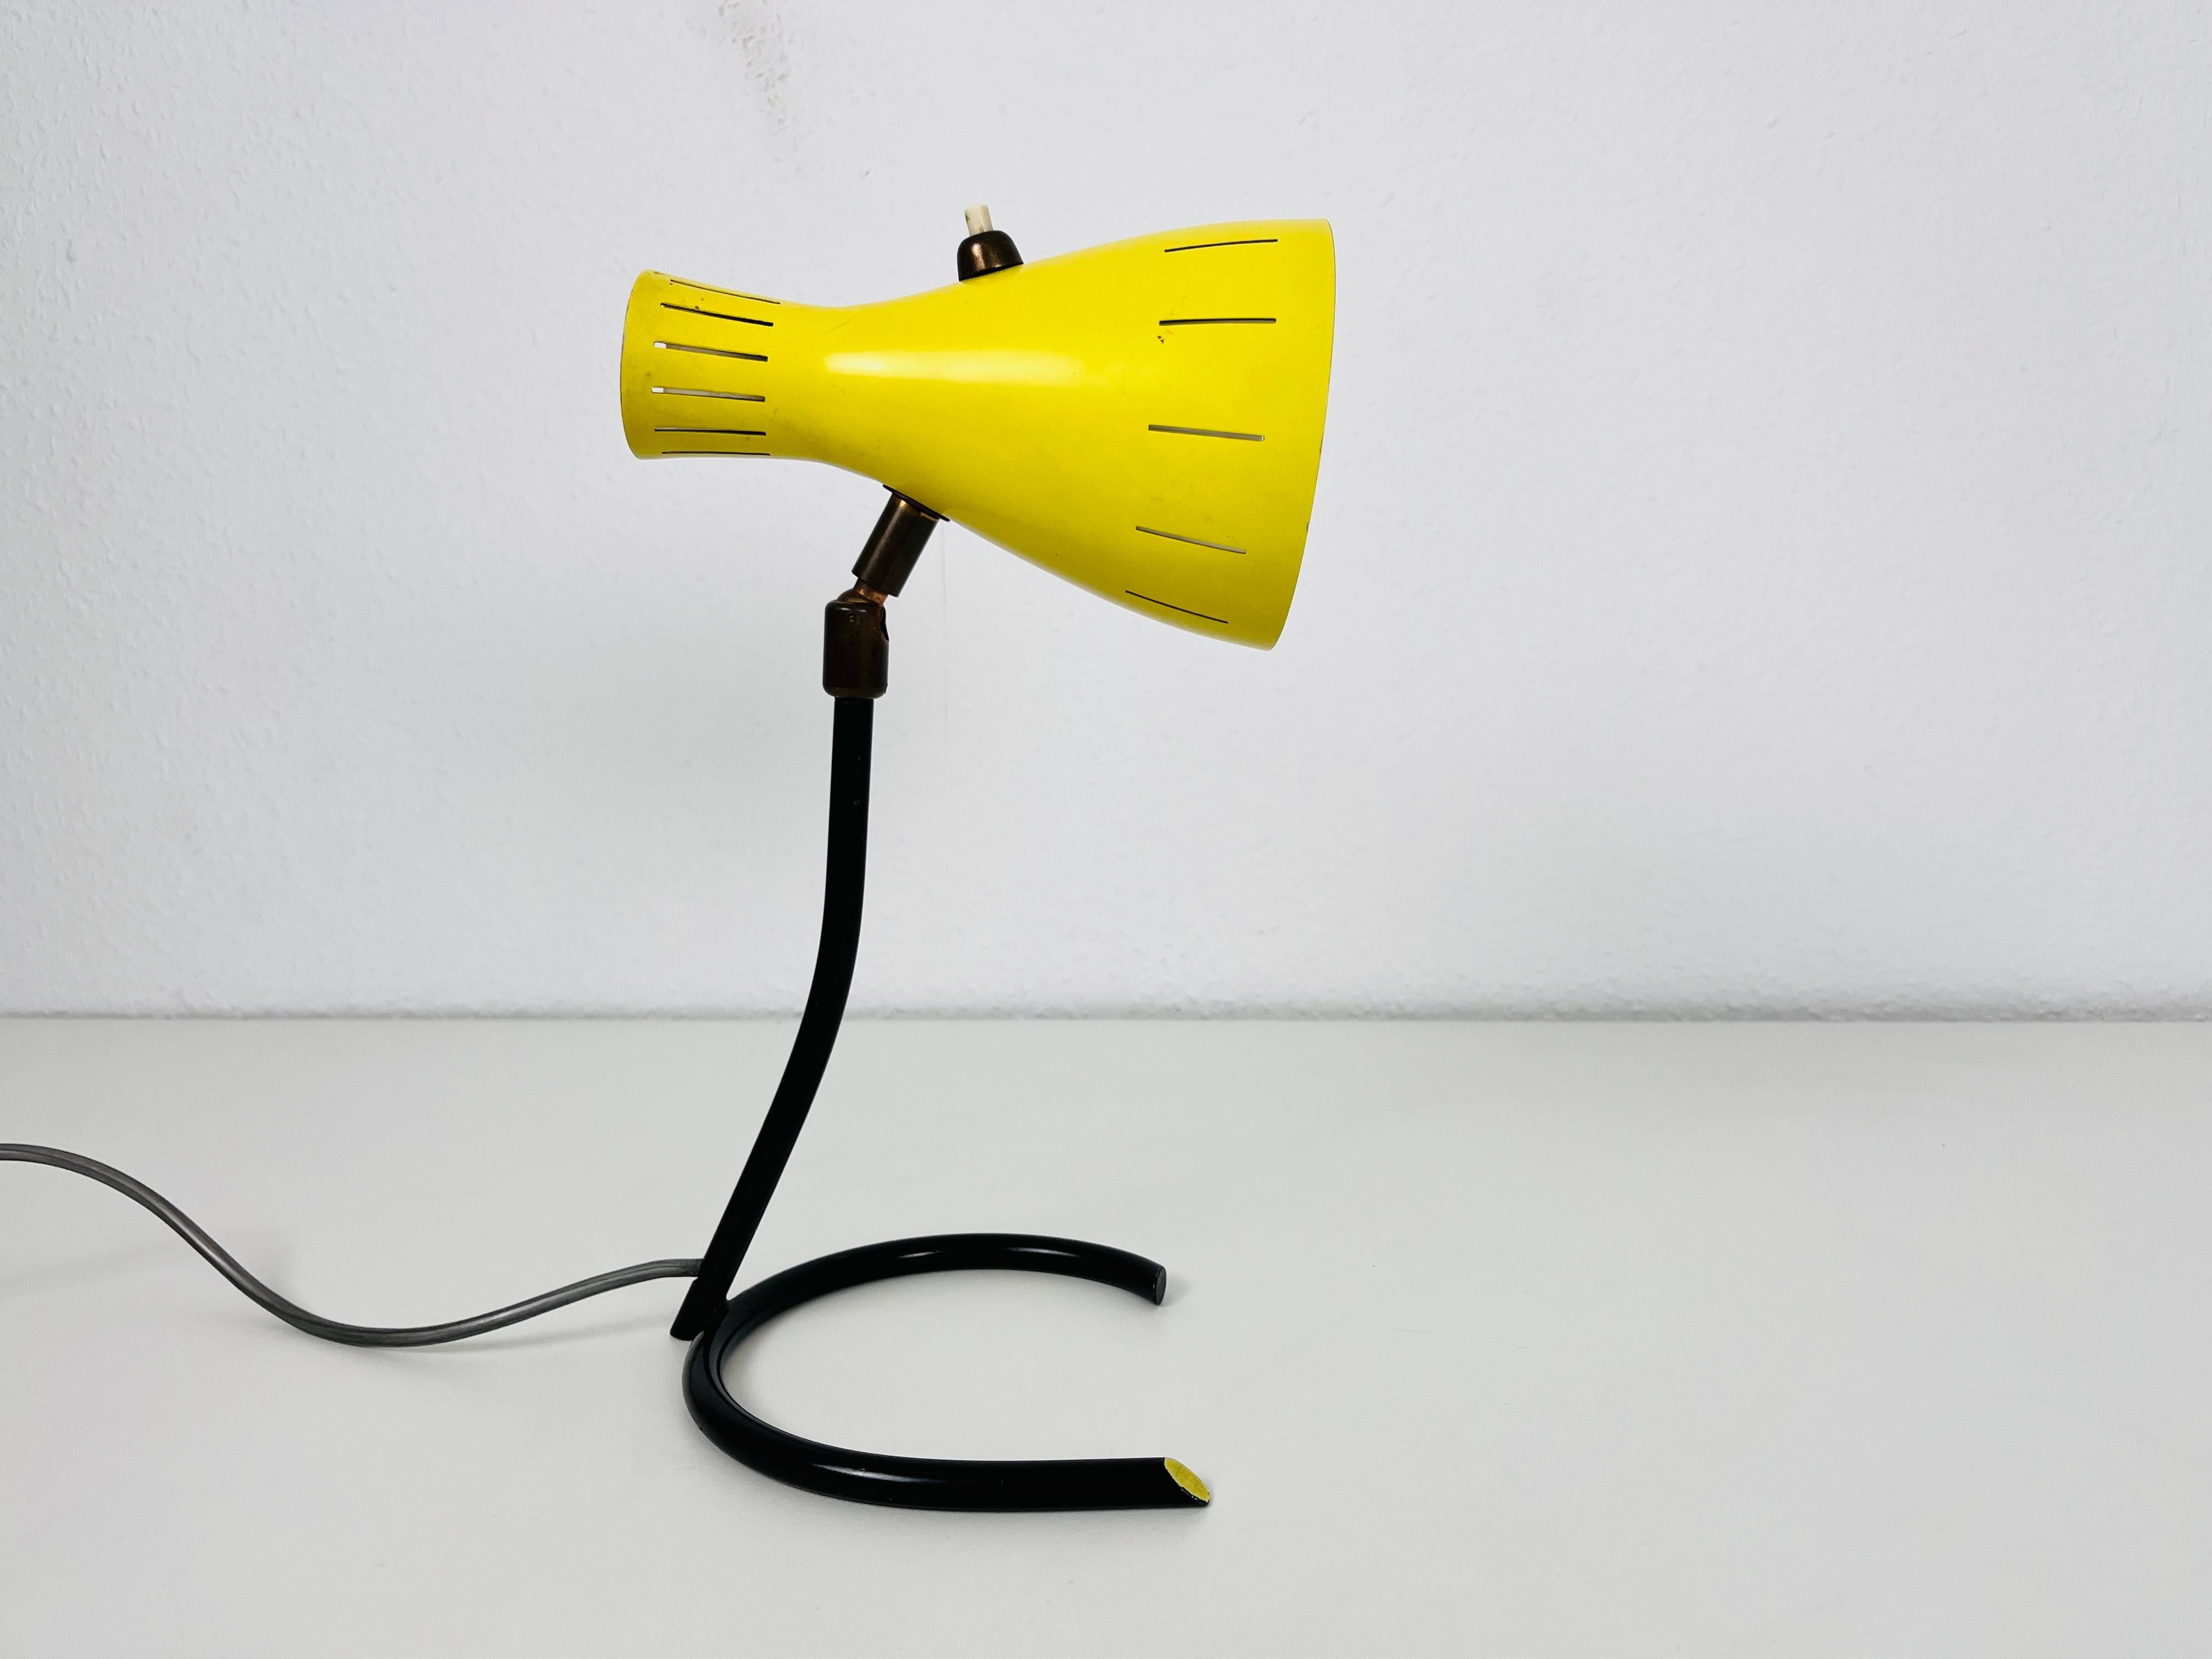 Mid-Century Modern Italian Table Lamp in the Style of Stilnovo, 1960s, Italy For Sale